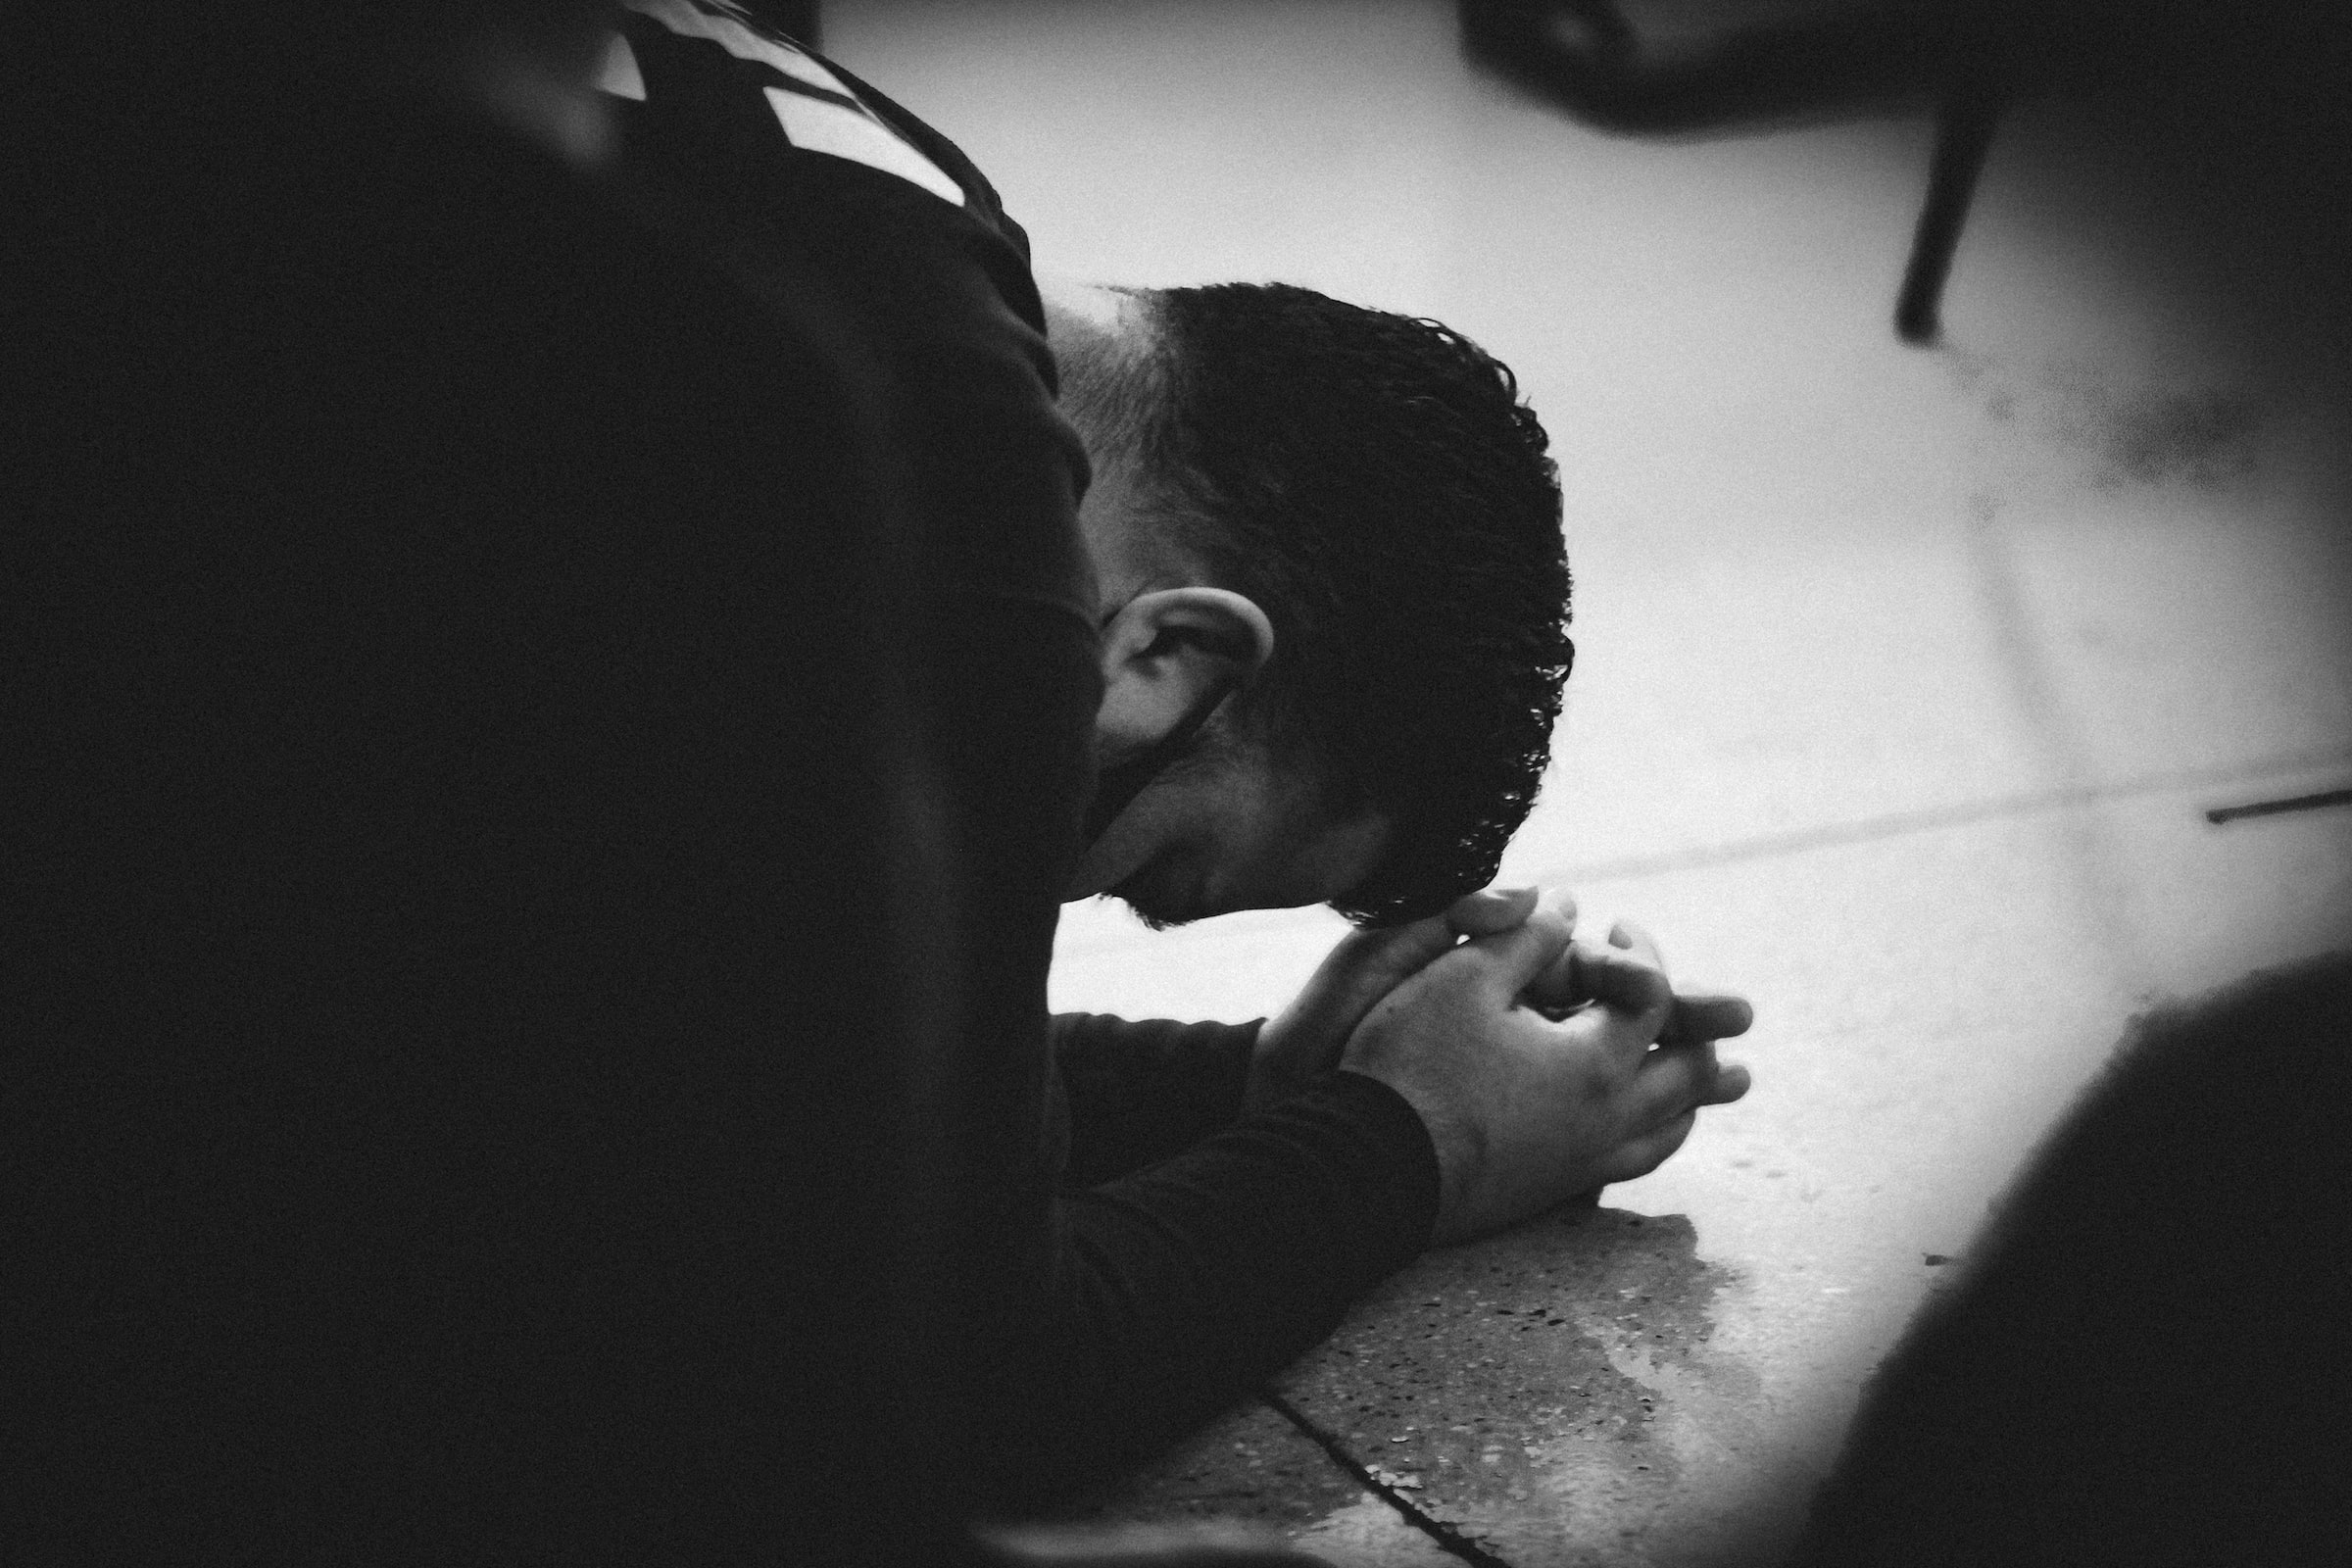 Young man praying on the floor